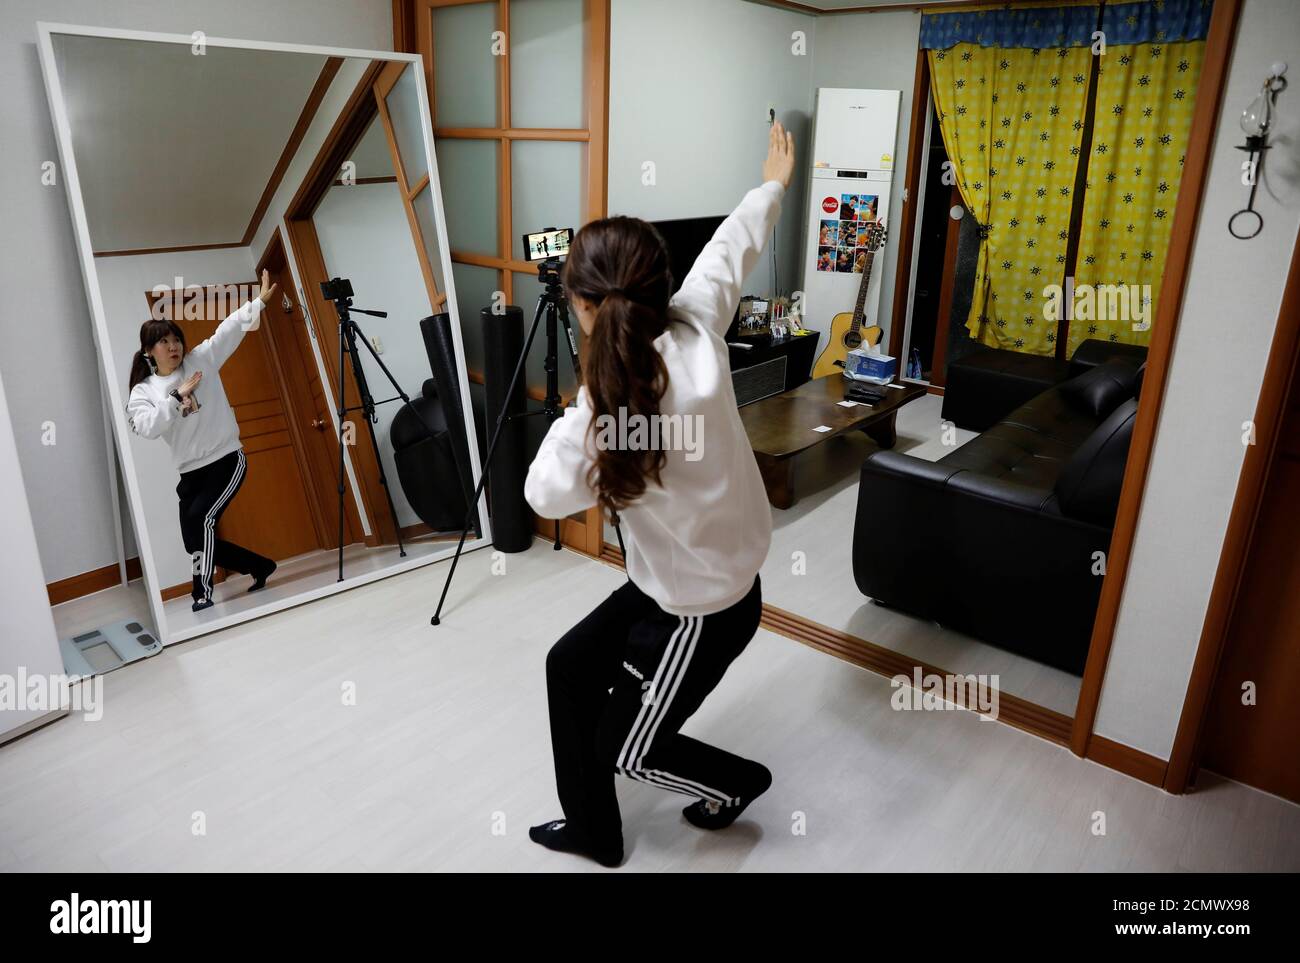 Kim Myung-hae, 46, a pre-school teacher, practices a dance by the South Korean boyband BTS as she watches a YouTube video at her home, during the novel coronavirus disease (COVID-19) outbreak, in Gumi, Gyeongsang Province, South Korea, March 13, 2020. Kim has been self-isolating since the end of February. 'Since I can't go outside, I do a lot of online shopping. I surf the internet a lot too... I tend to watch a lot of YouTube,' Kim said. 'I miss everyday life. It all feels more special now. Before the coronavirus came, I went out everyday and would meet people all the time. I actually enjoyed Stock Photo